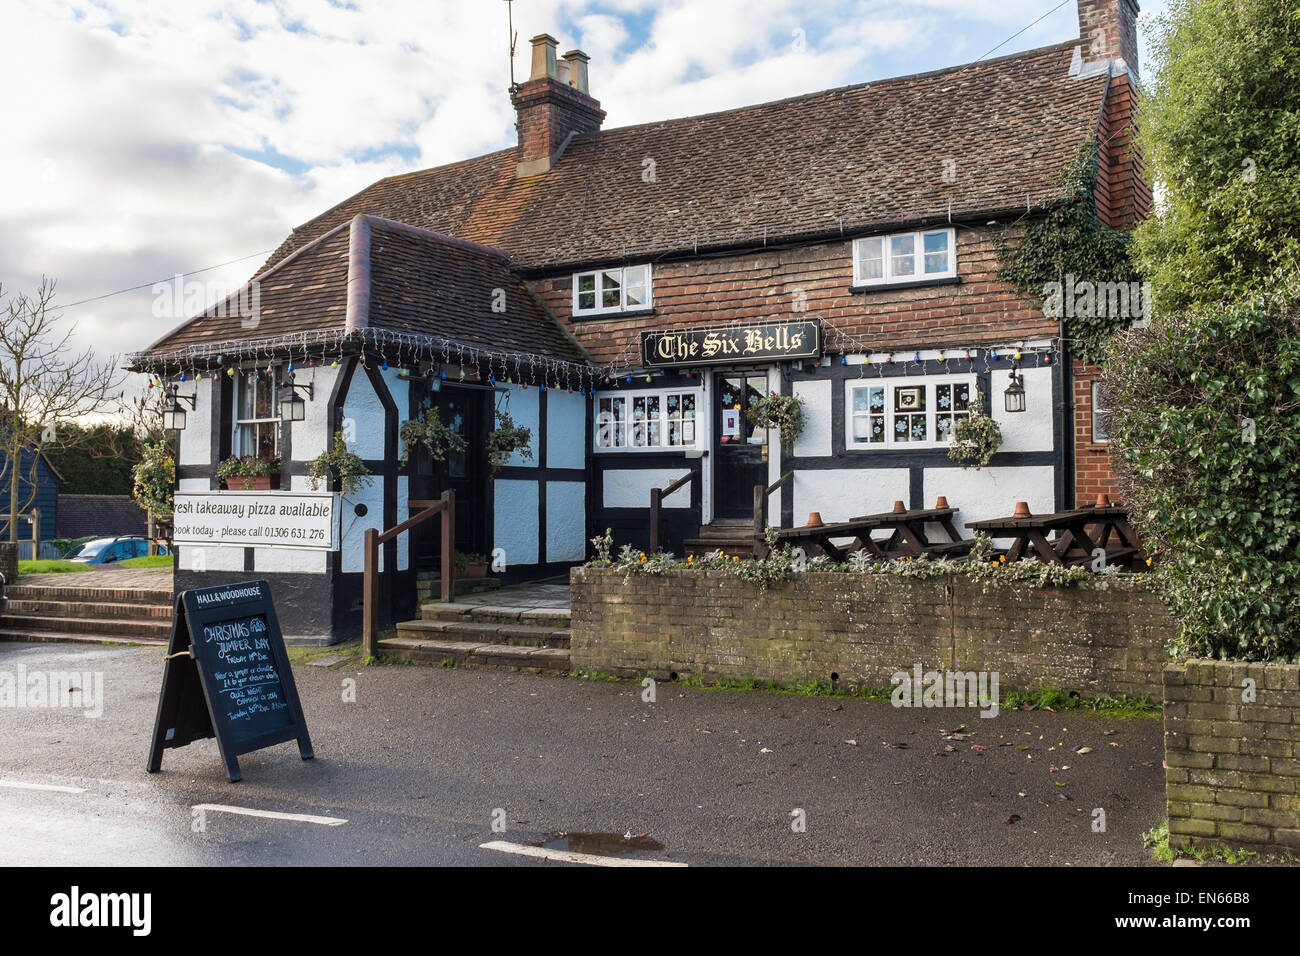 The Six Bells public house in Newdigate, Surrey, UK Stock Photo